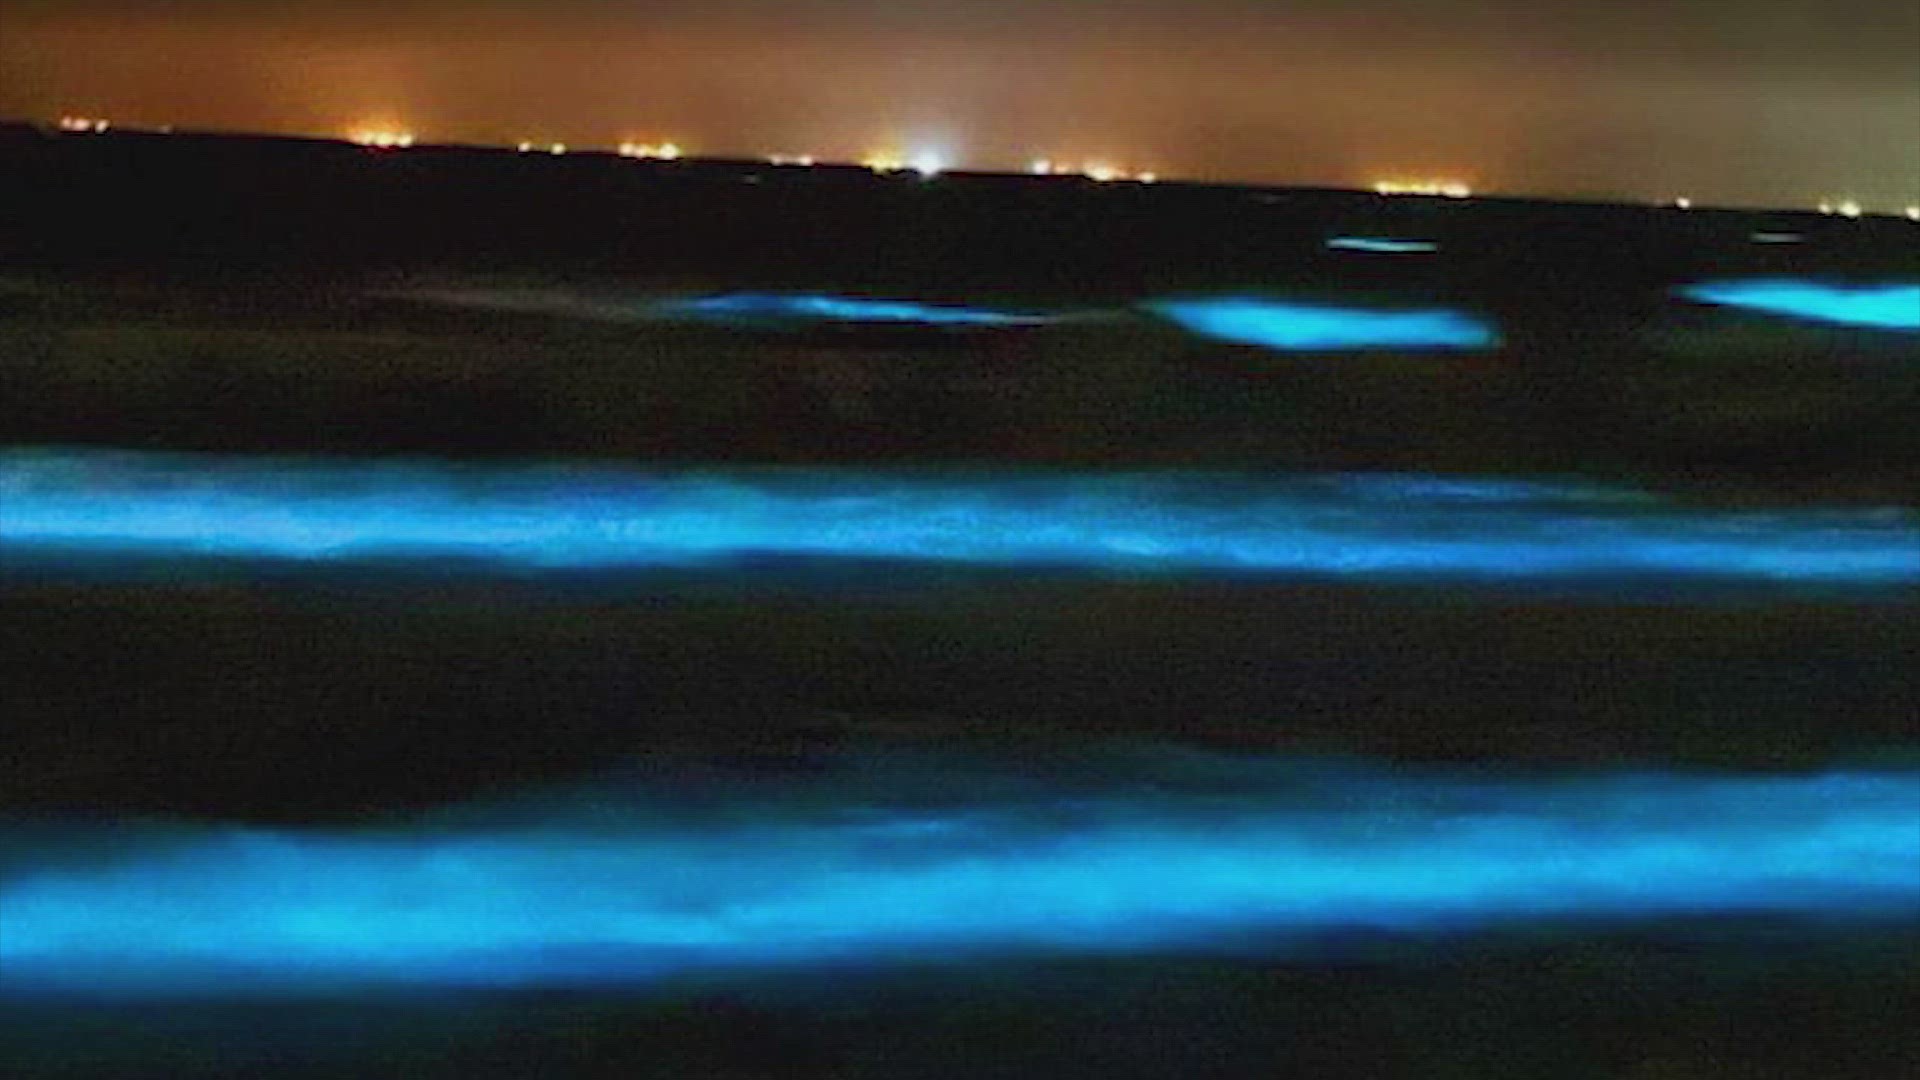 The organisms have a chemical reaction that releases energy in the form of light, causing the blue glow in the water.